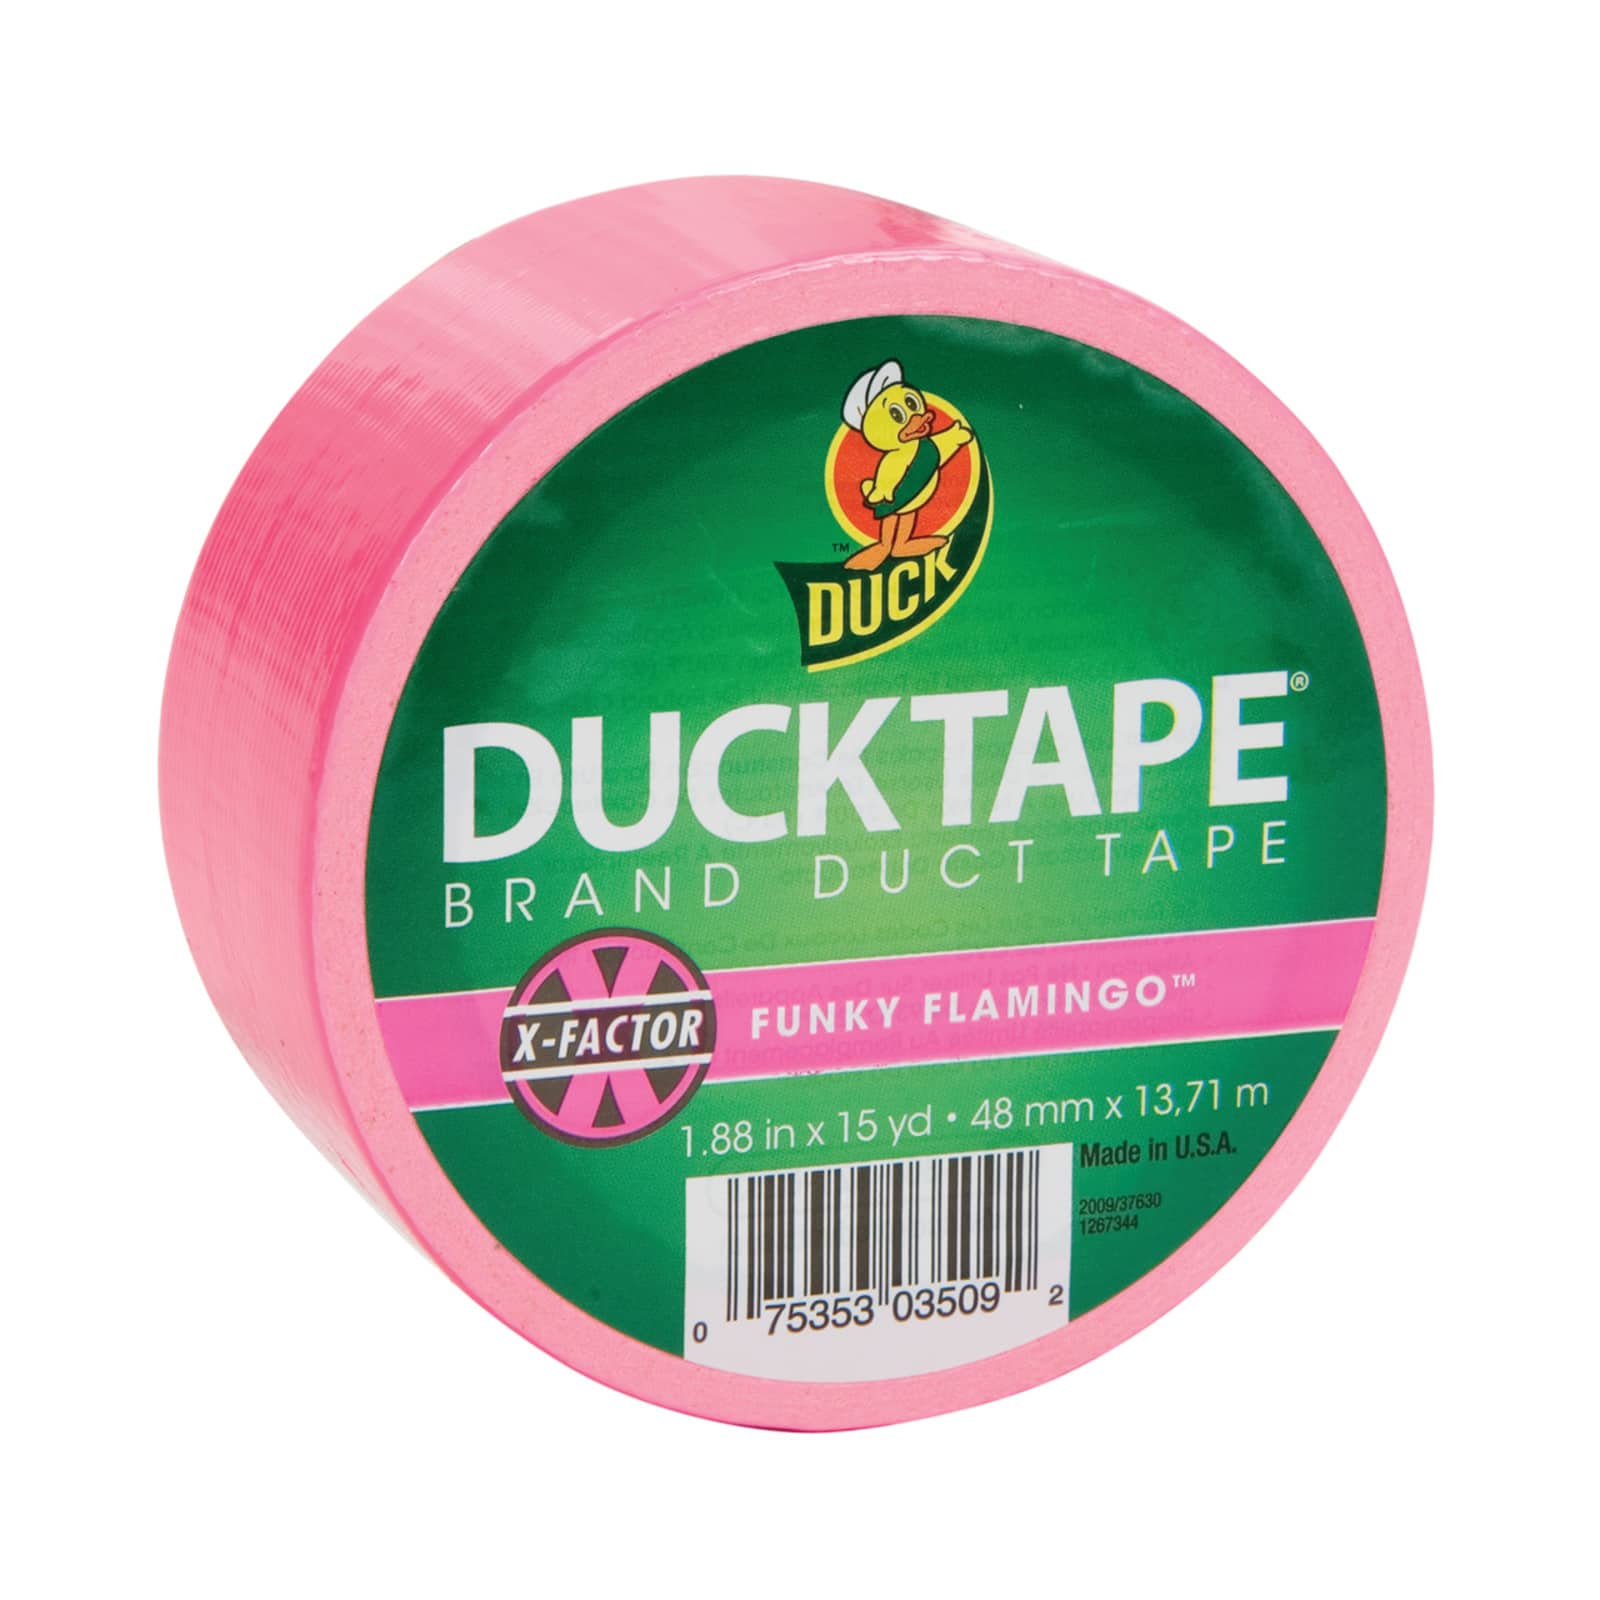 duct tape or duck tape